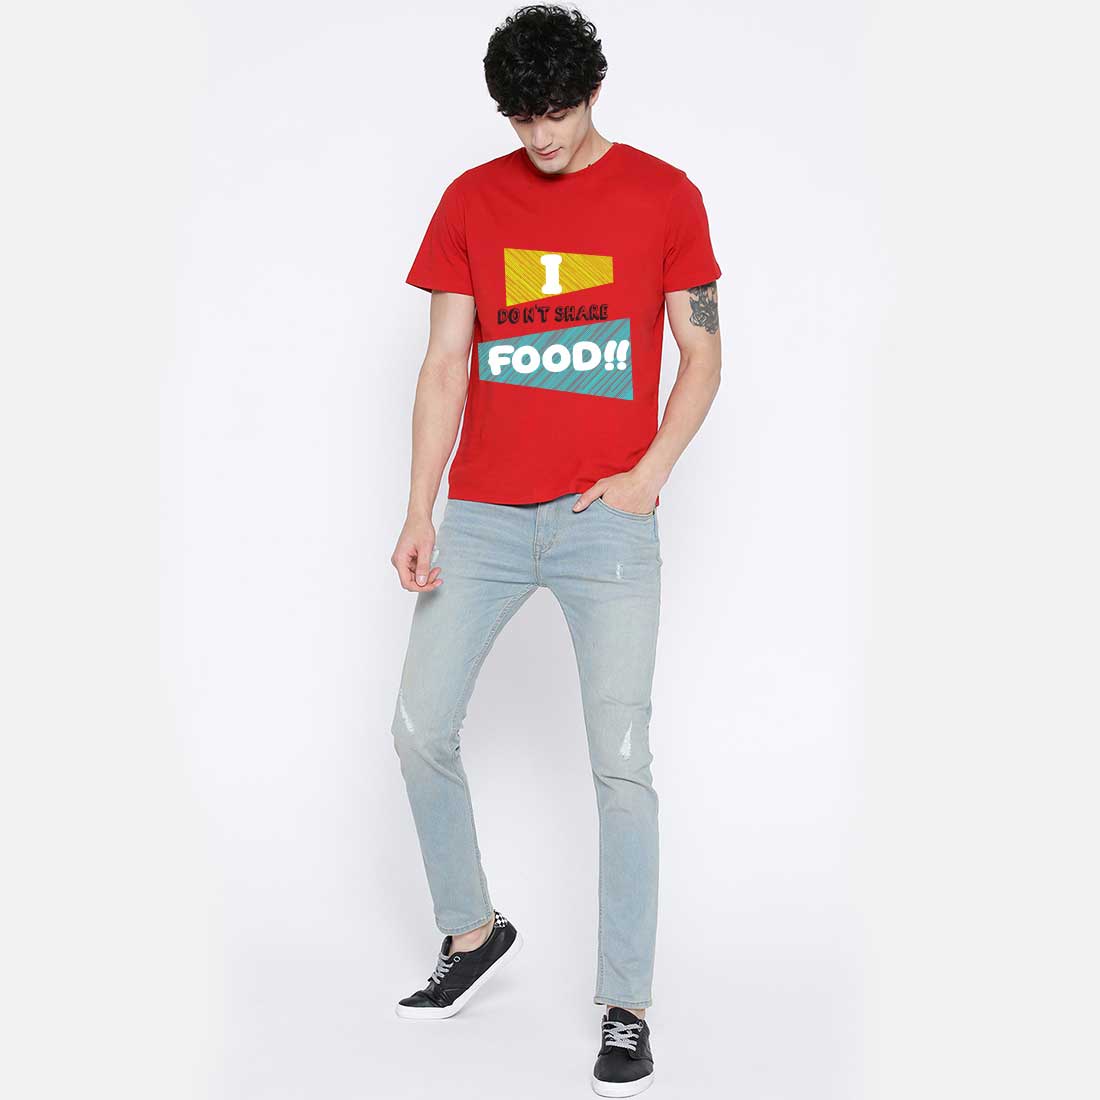 I Don't Share Food Red Men T-Shirt